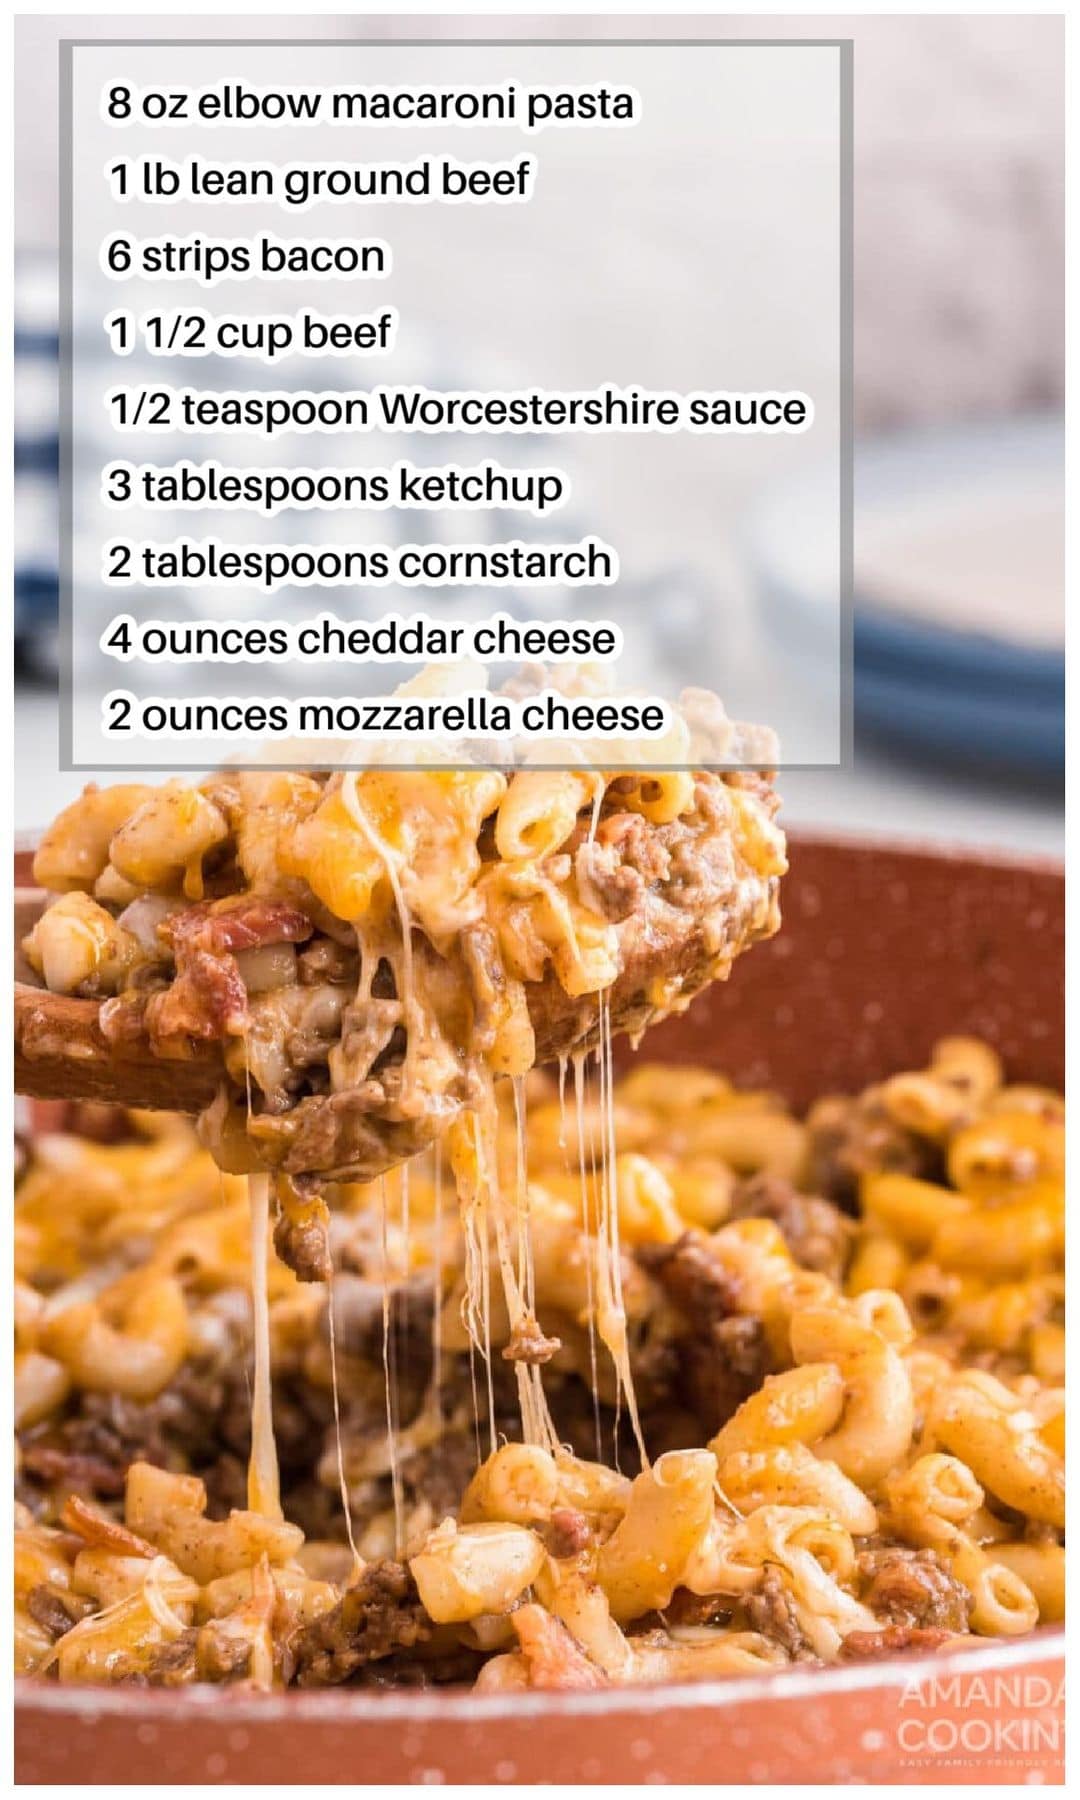 A close-up of a cheesy beef and bacon macaroni casserole, with a spoon lifting a portion to show the melted mozzarella cheese strings, accompanied by an ingredients list on the side.